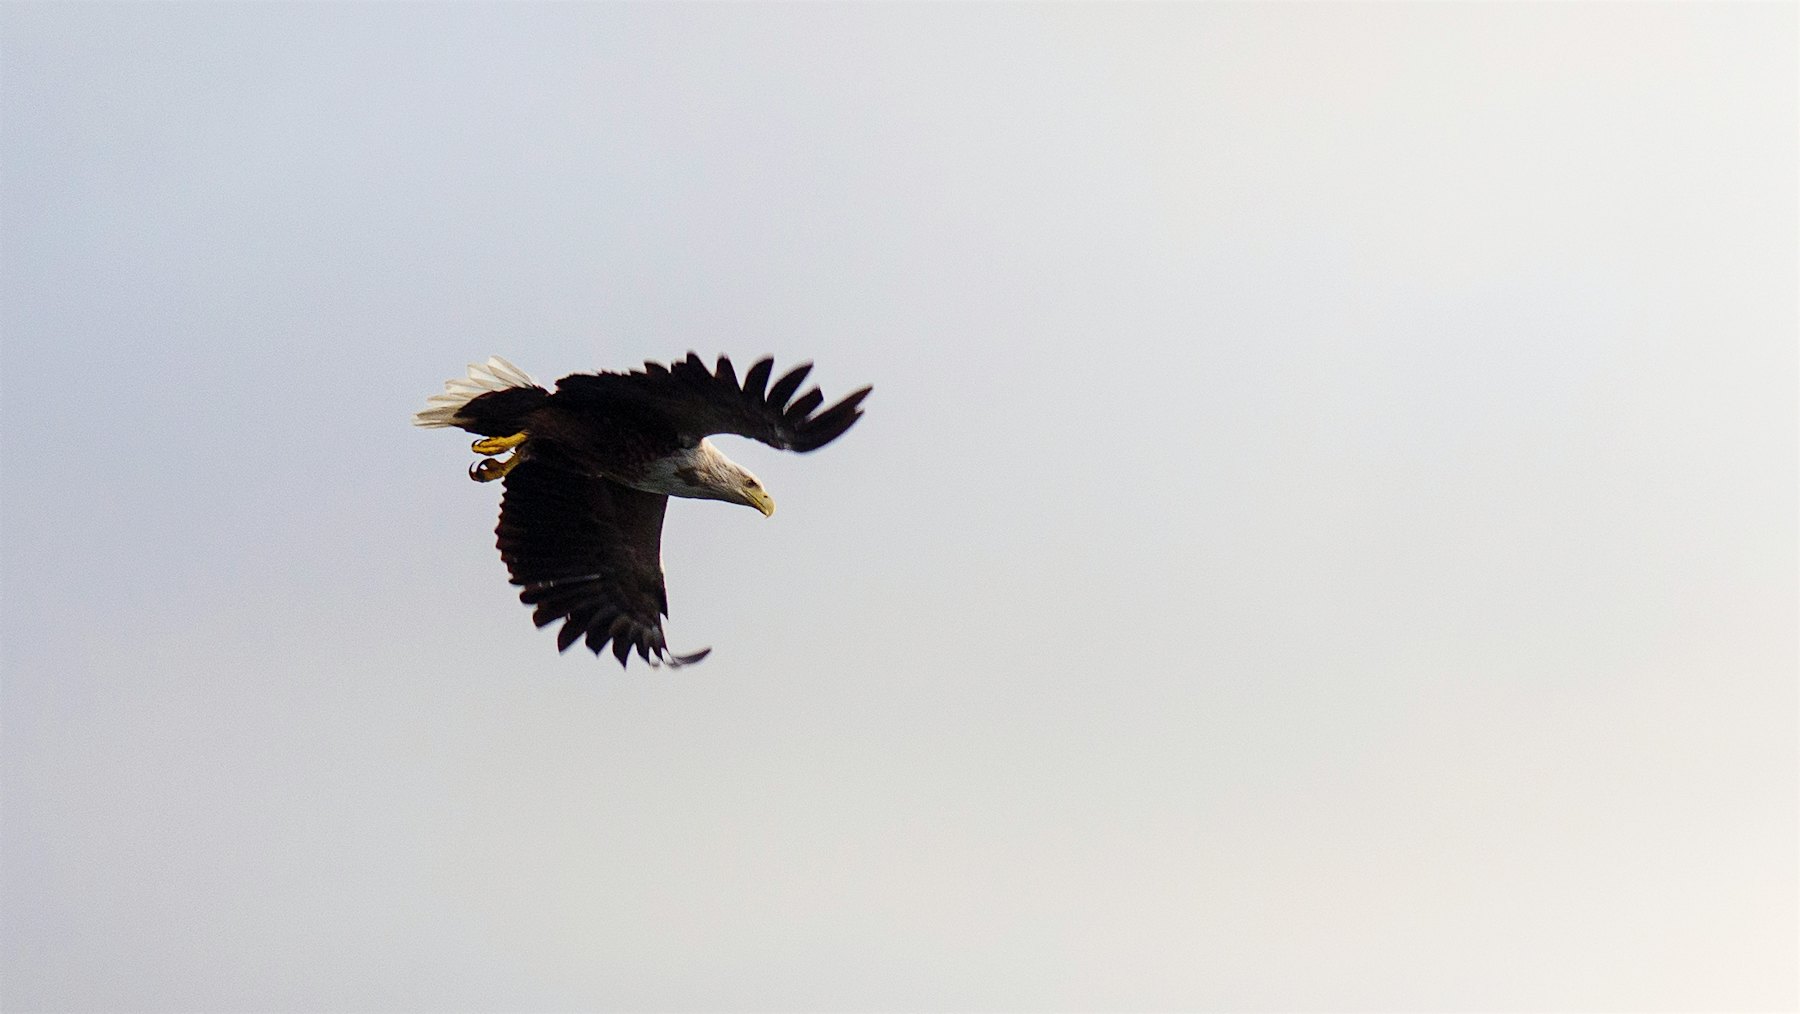 Sea eagles fly in the sky. Photo